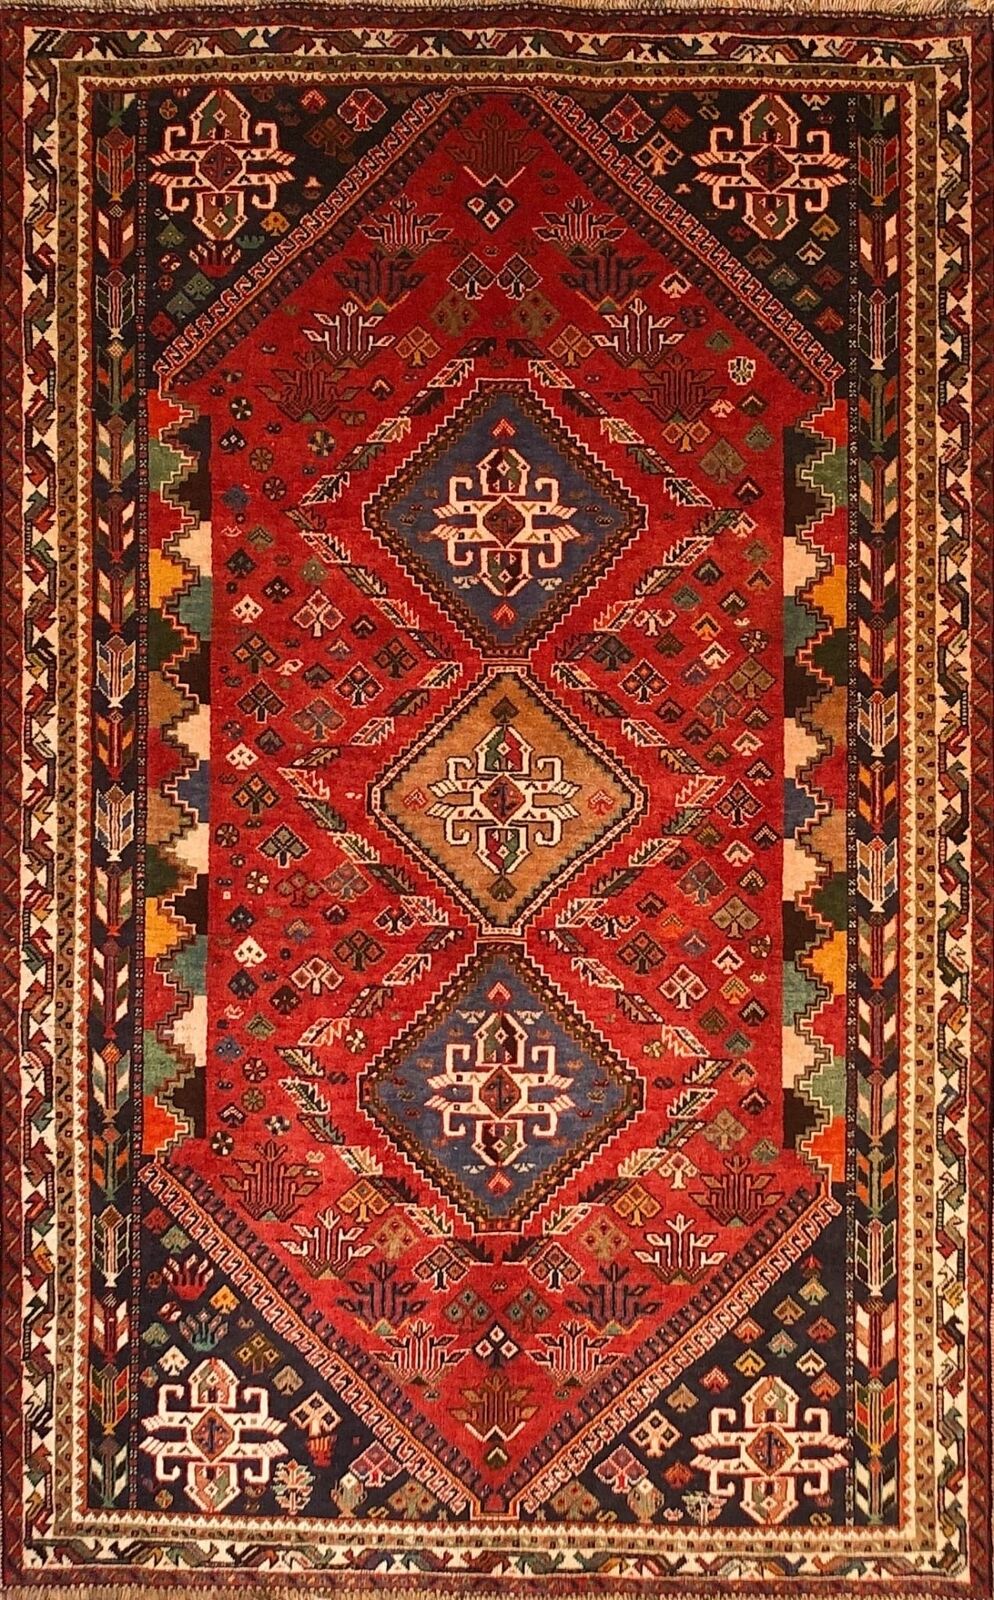 Hand-knotted Rug (Carpet) 5'4X8'5, Shiraz mint condition